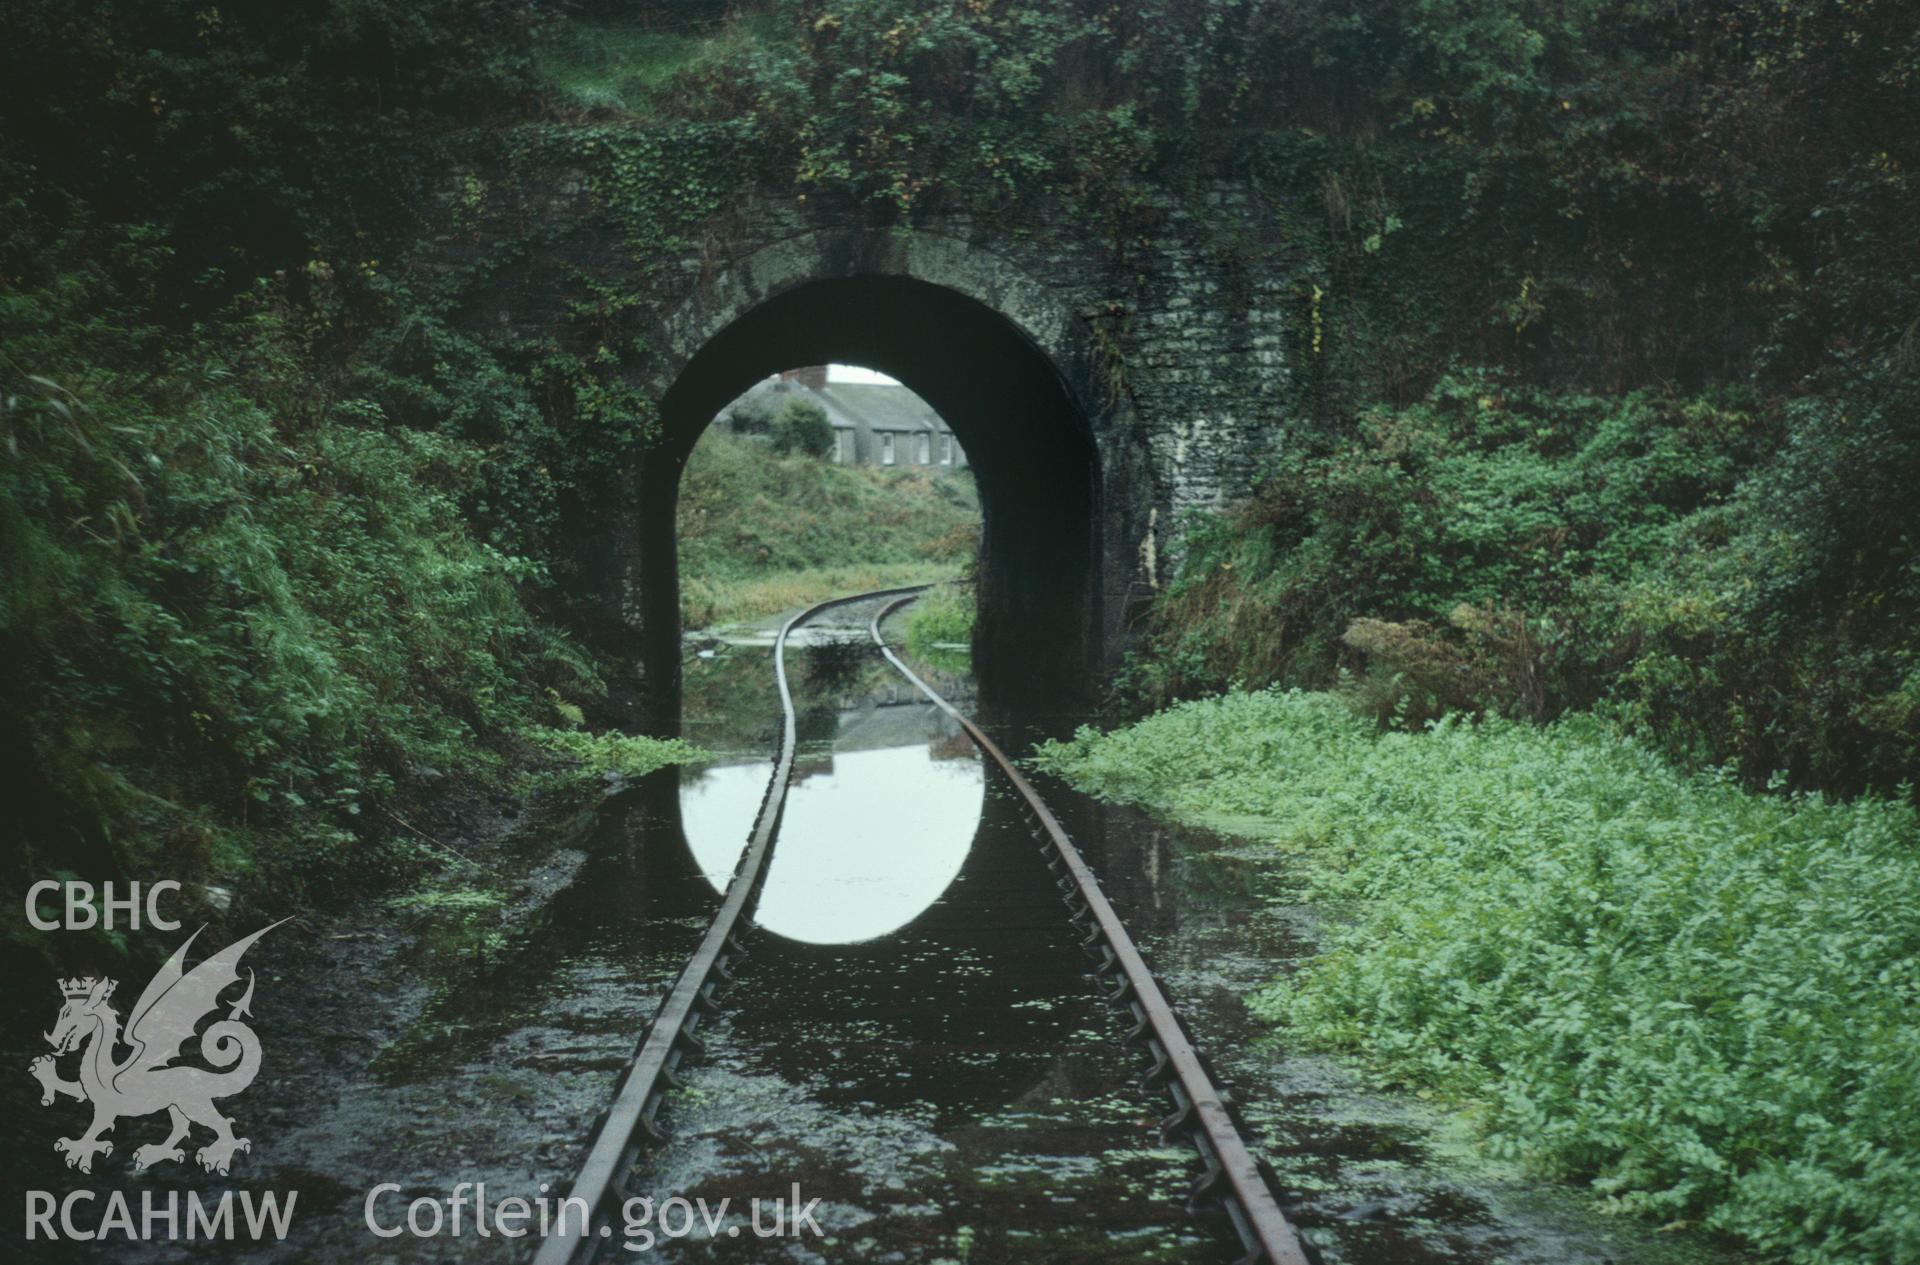 35mm colour slide showing Stanley's Bridge, Burry Port and Gwendraeth Valley Railway, Carmarthenshire by Dylan Roberts.